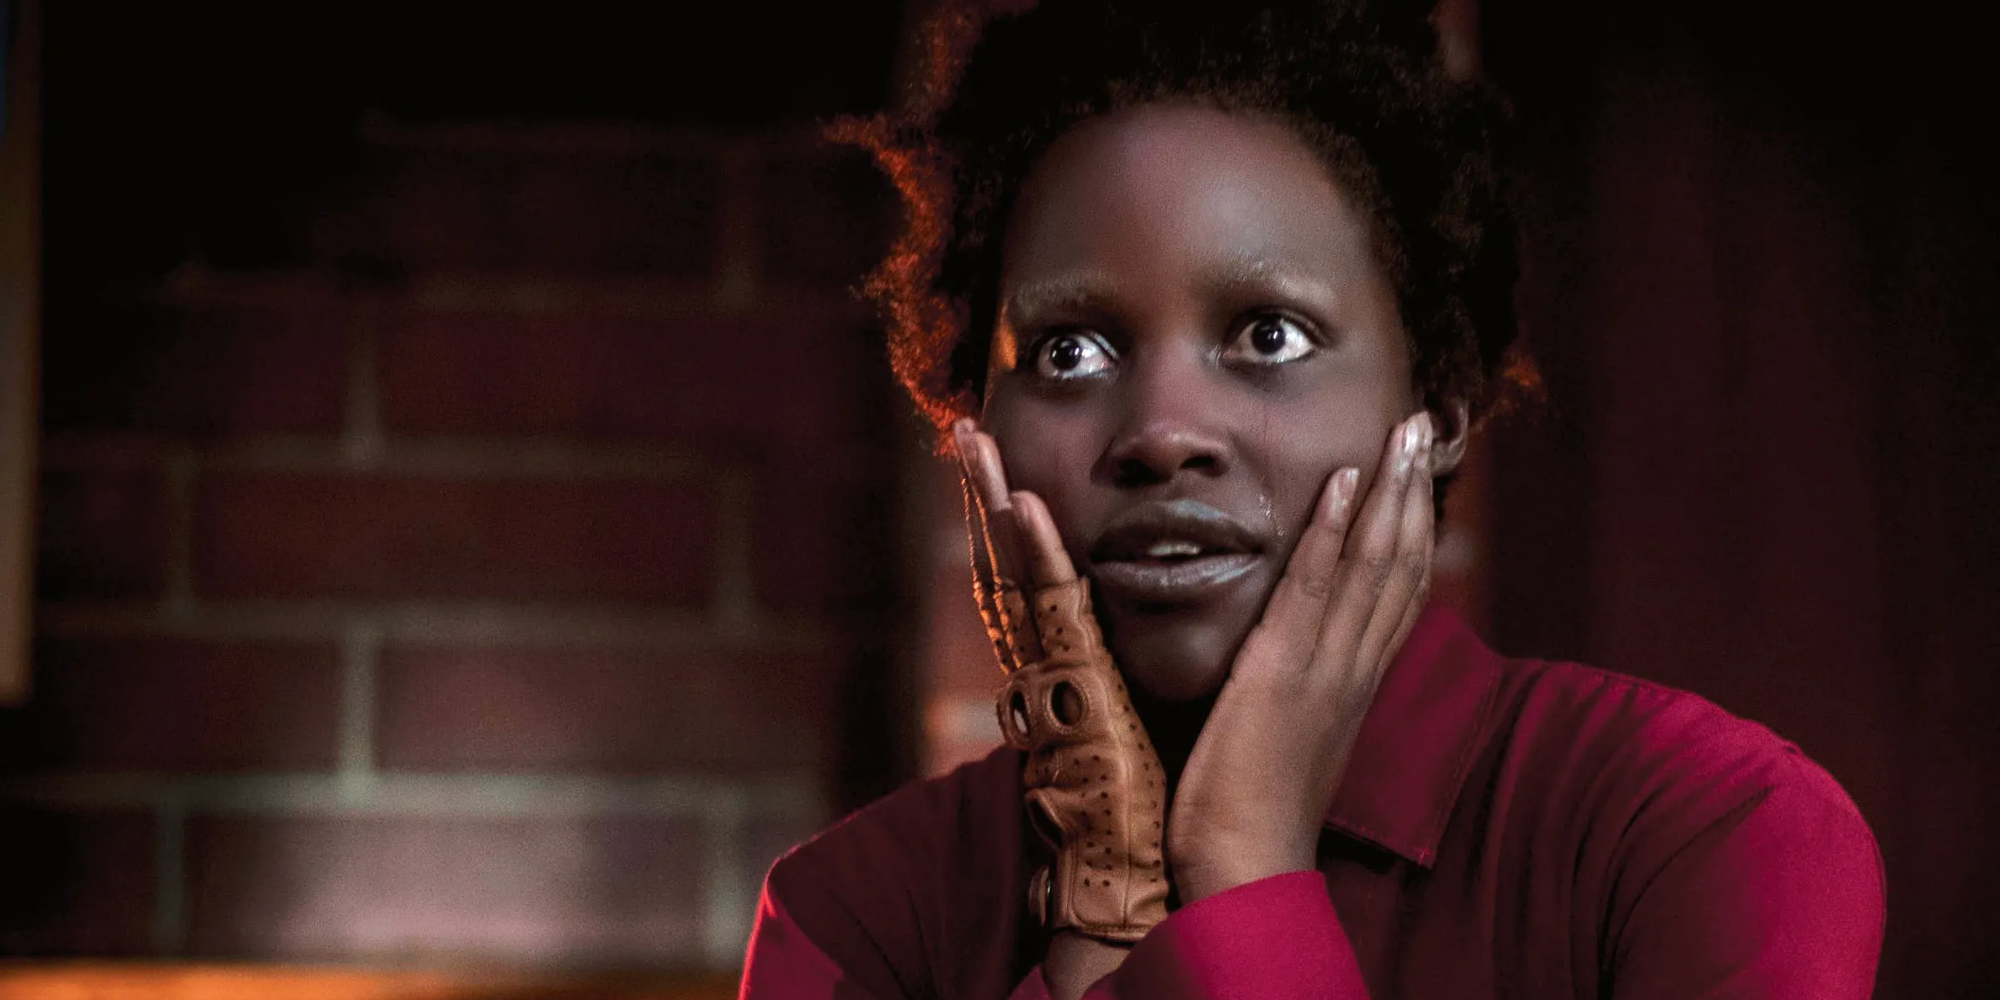 US lupita nyong'o stars as red as she confronts the family on the surface